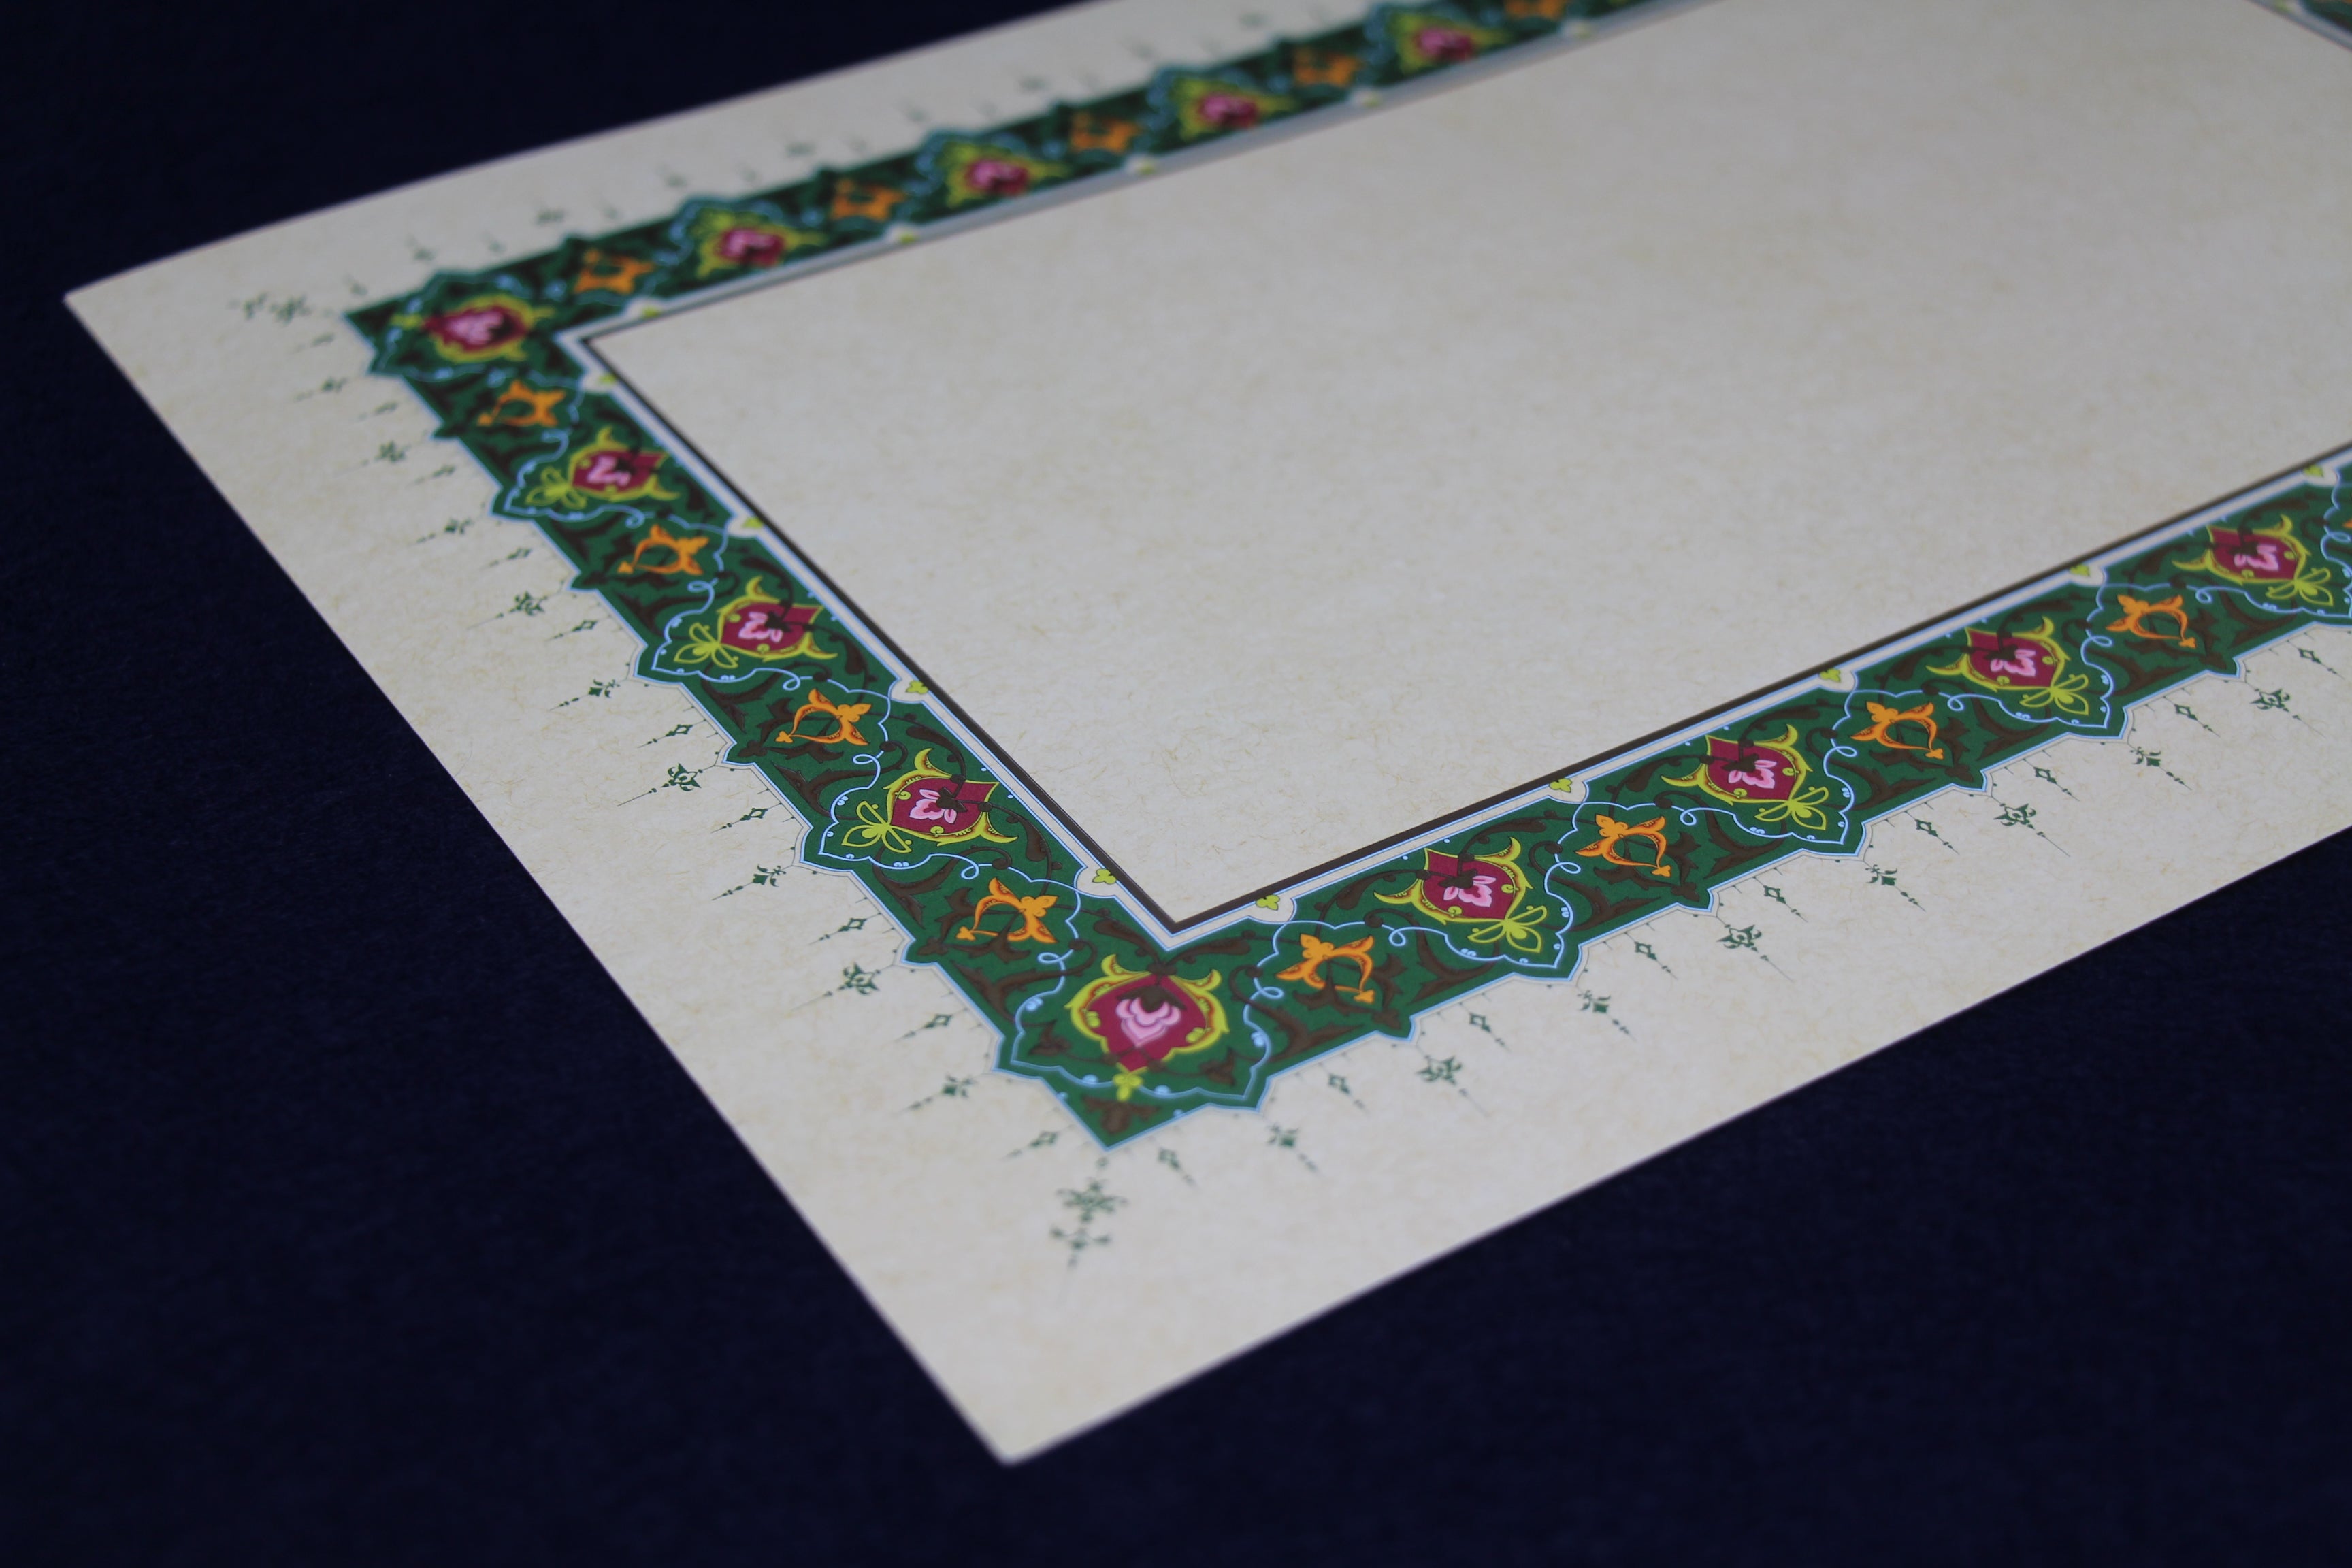 Loose sheets of paper for Arabic calligraphy with illuminated borders - pattern 3